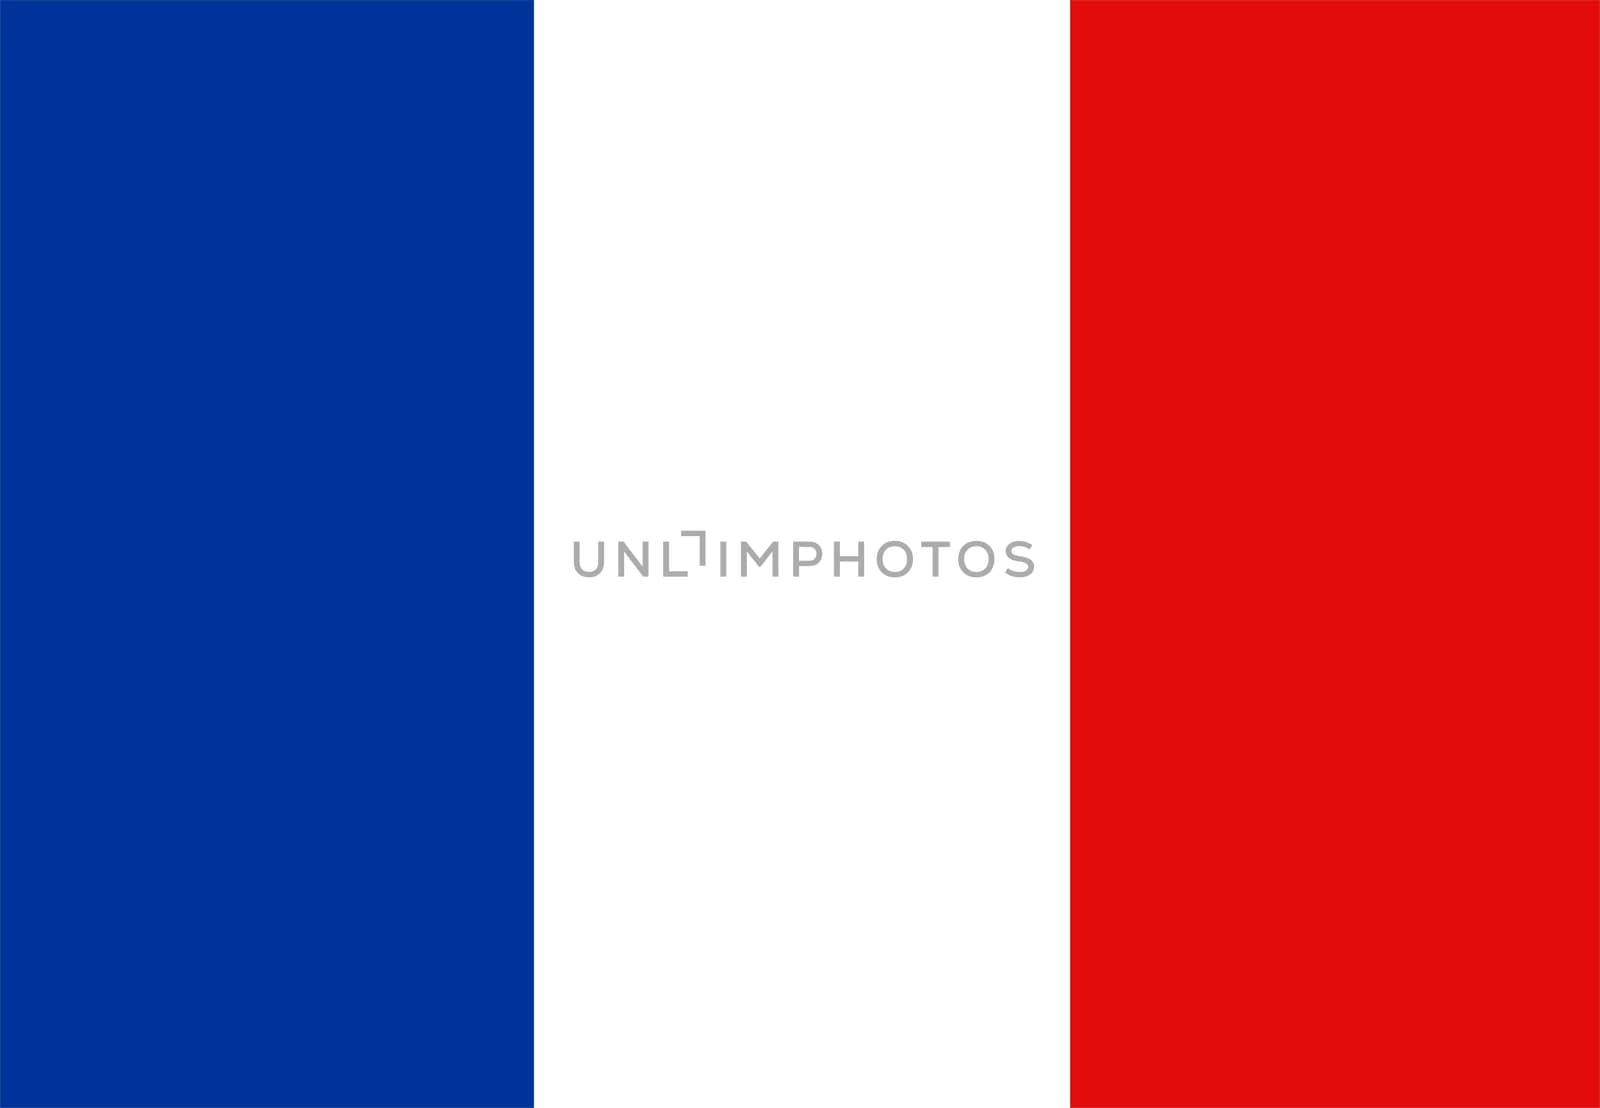 the flag of france over white with no pole